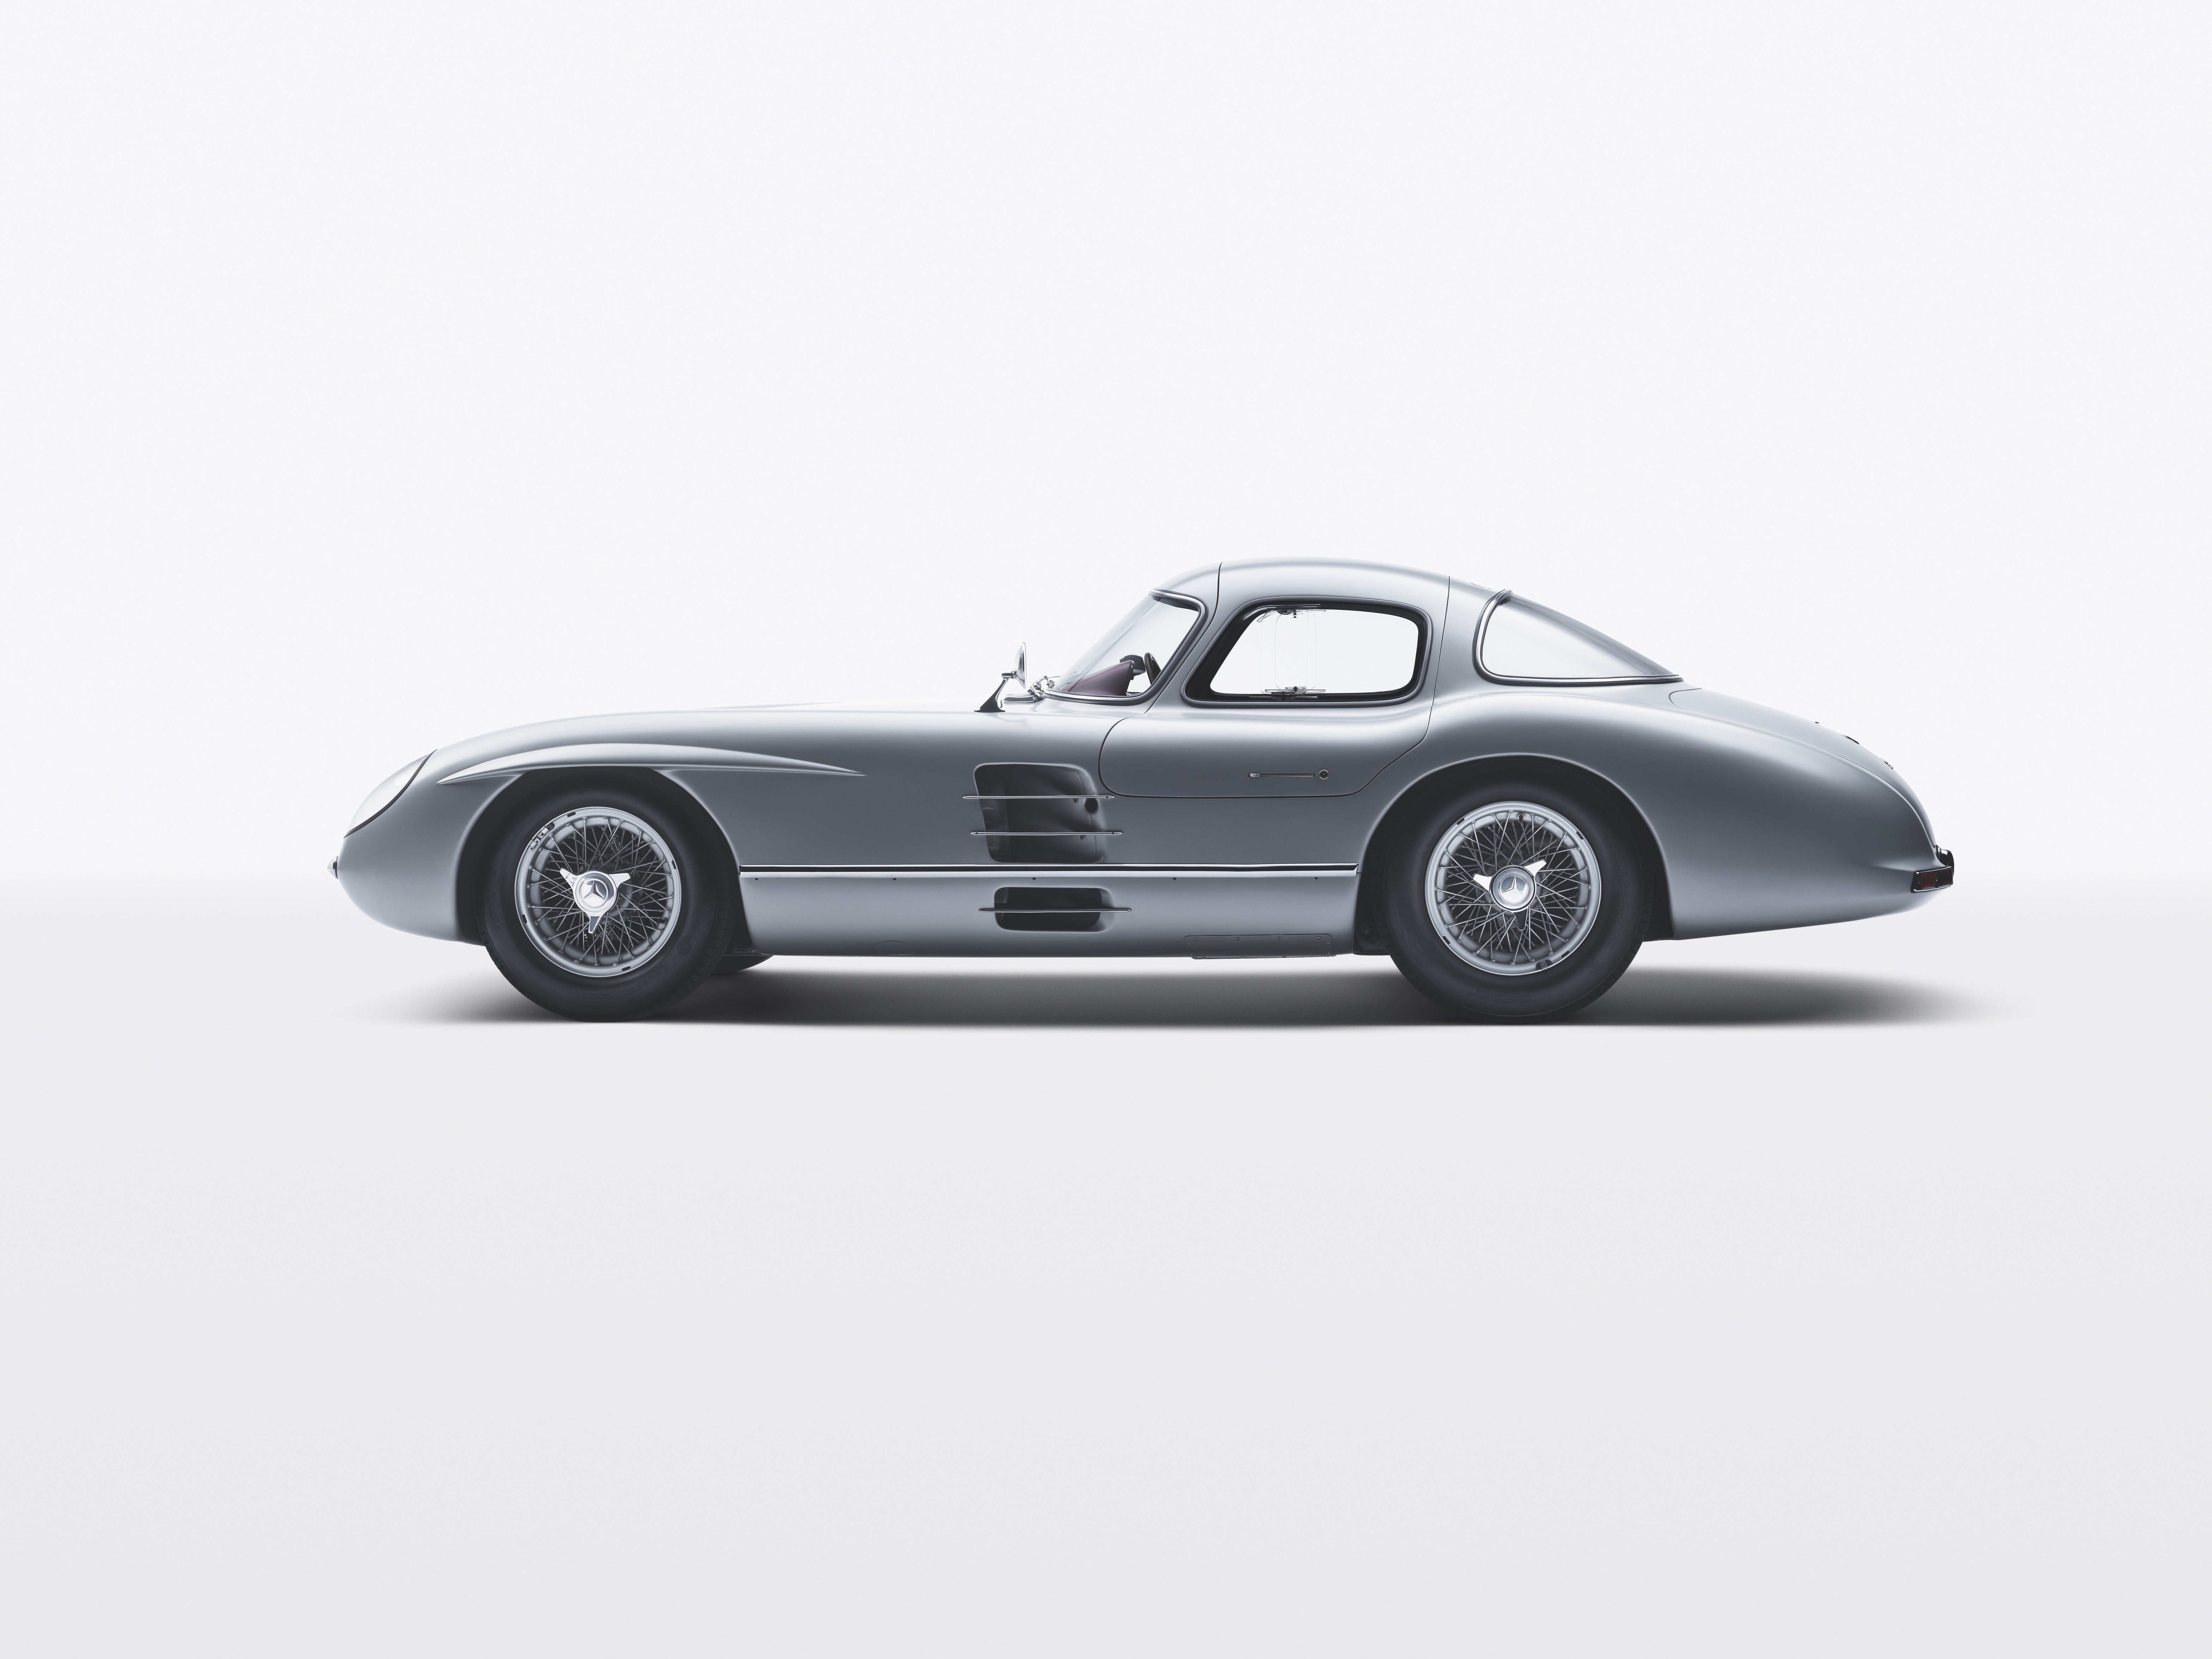 This Mercedes Is Officially the Most Expensive Car Ever Sold at $202 Million